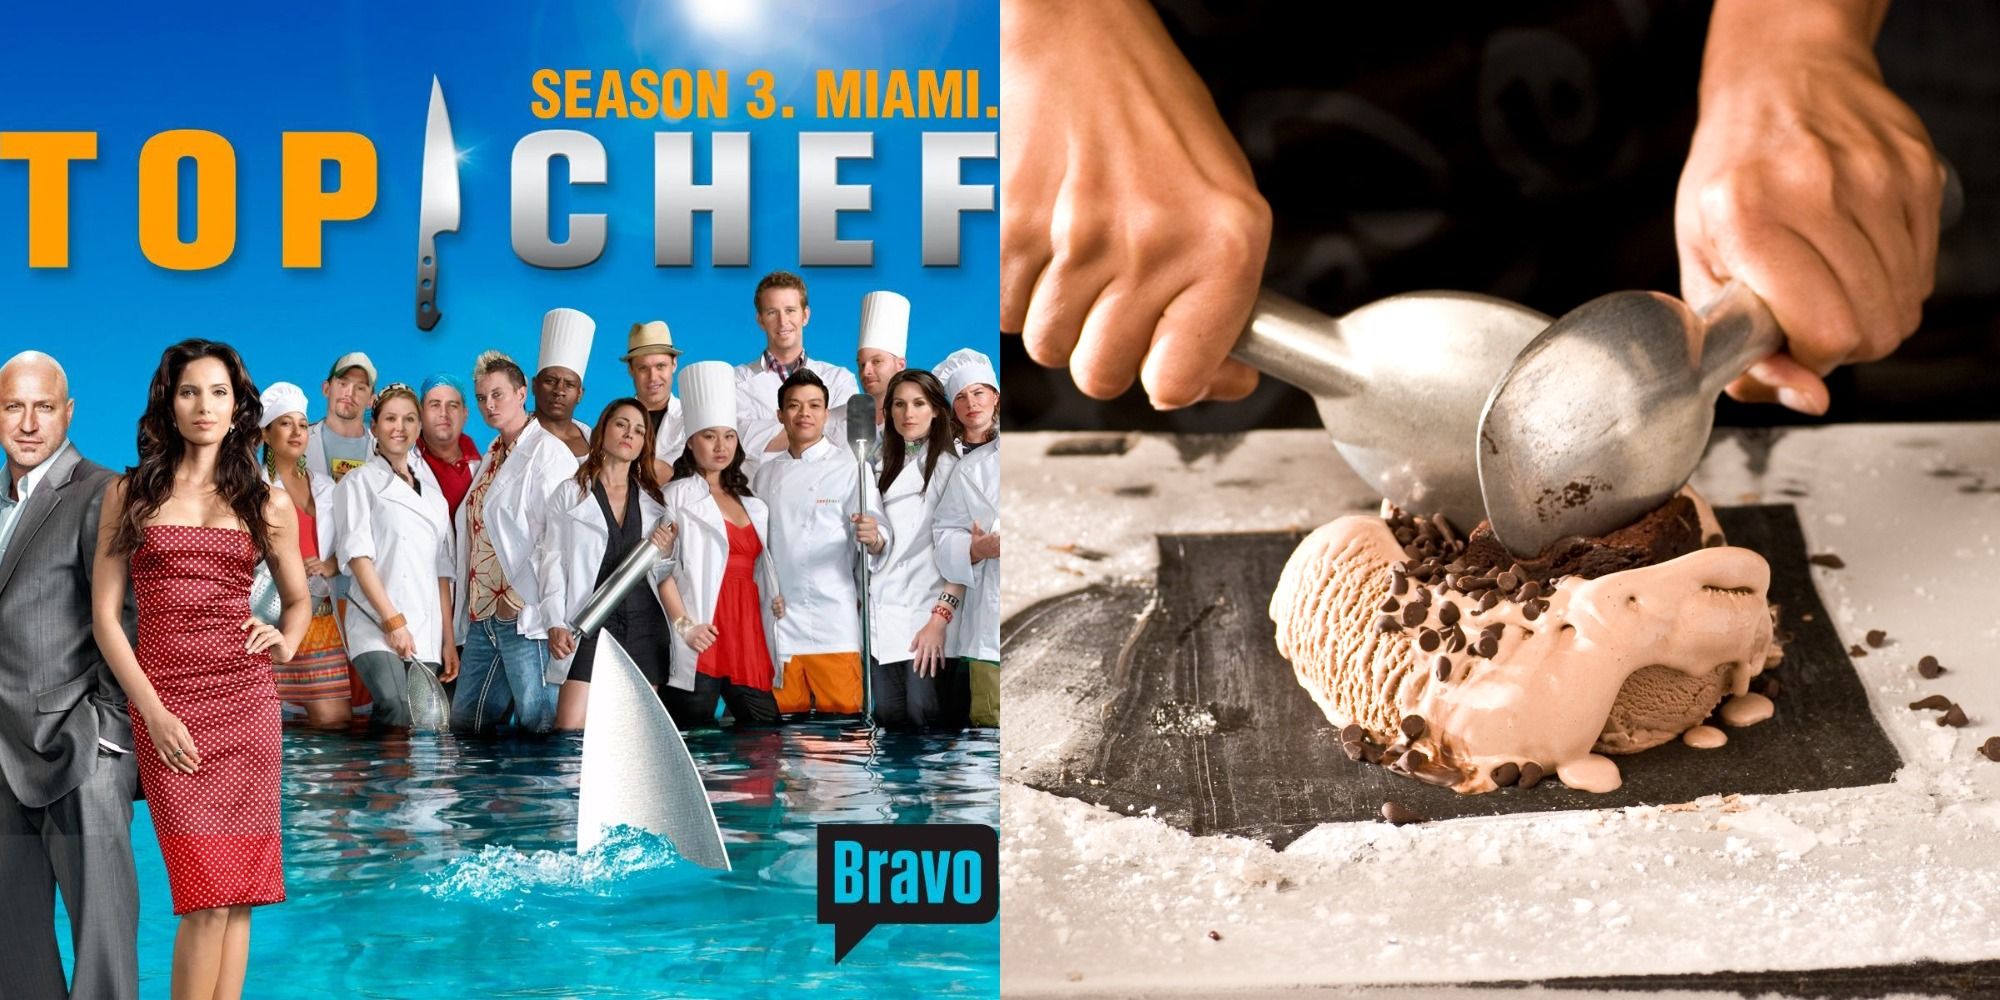 Split image showing the hosts and contestants of Top Chef Miami, and a pair of hands preparing an ice cream